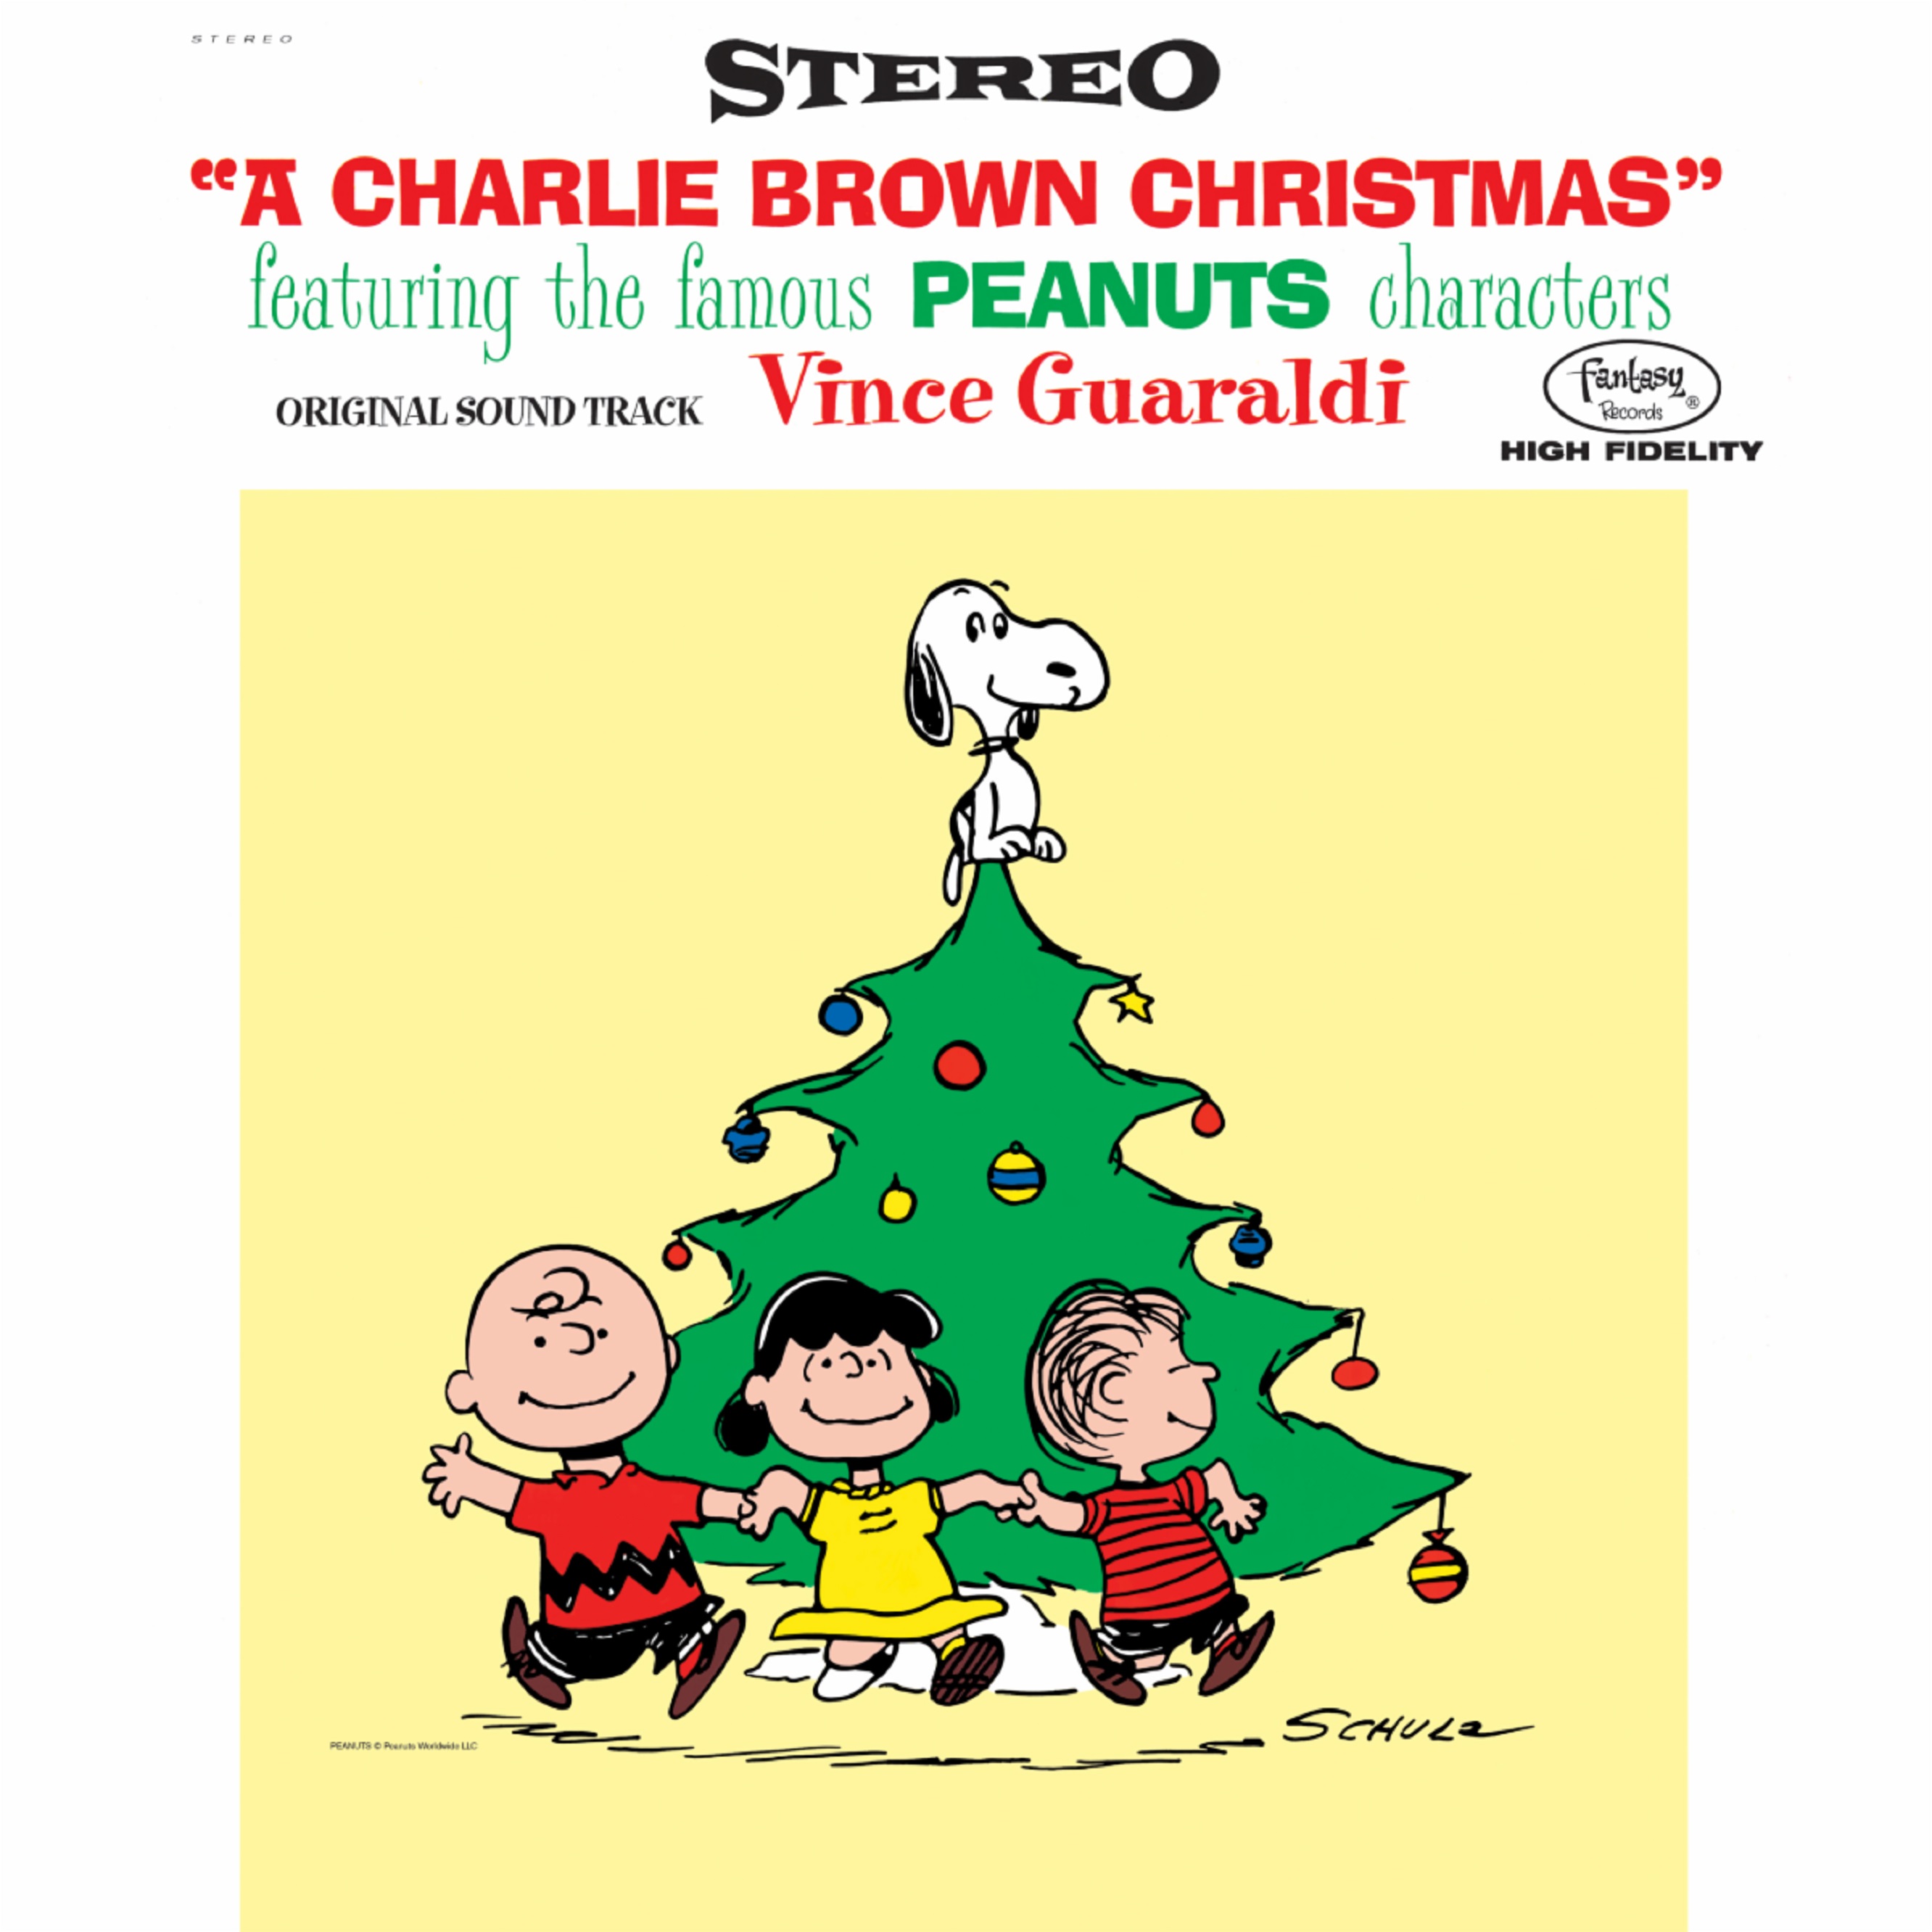 Deluxe Edition of 'A Charlie Brown Christmas' arrives in spatial audio